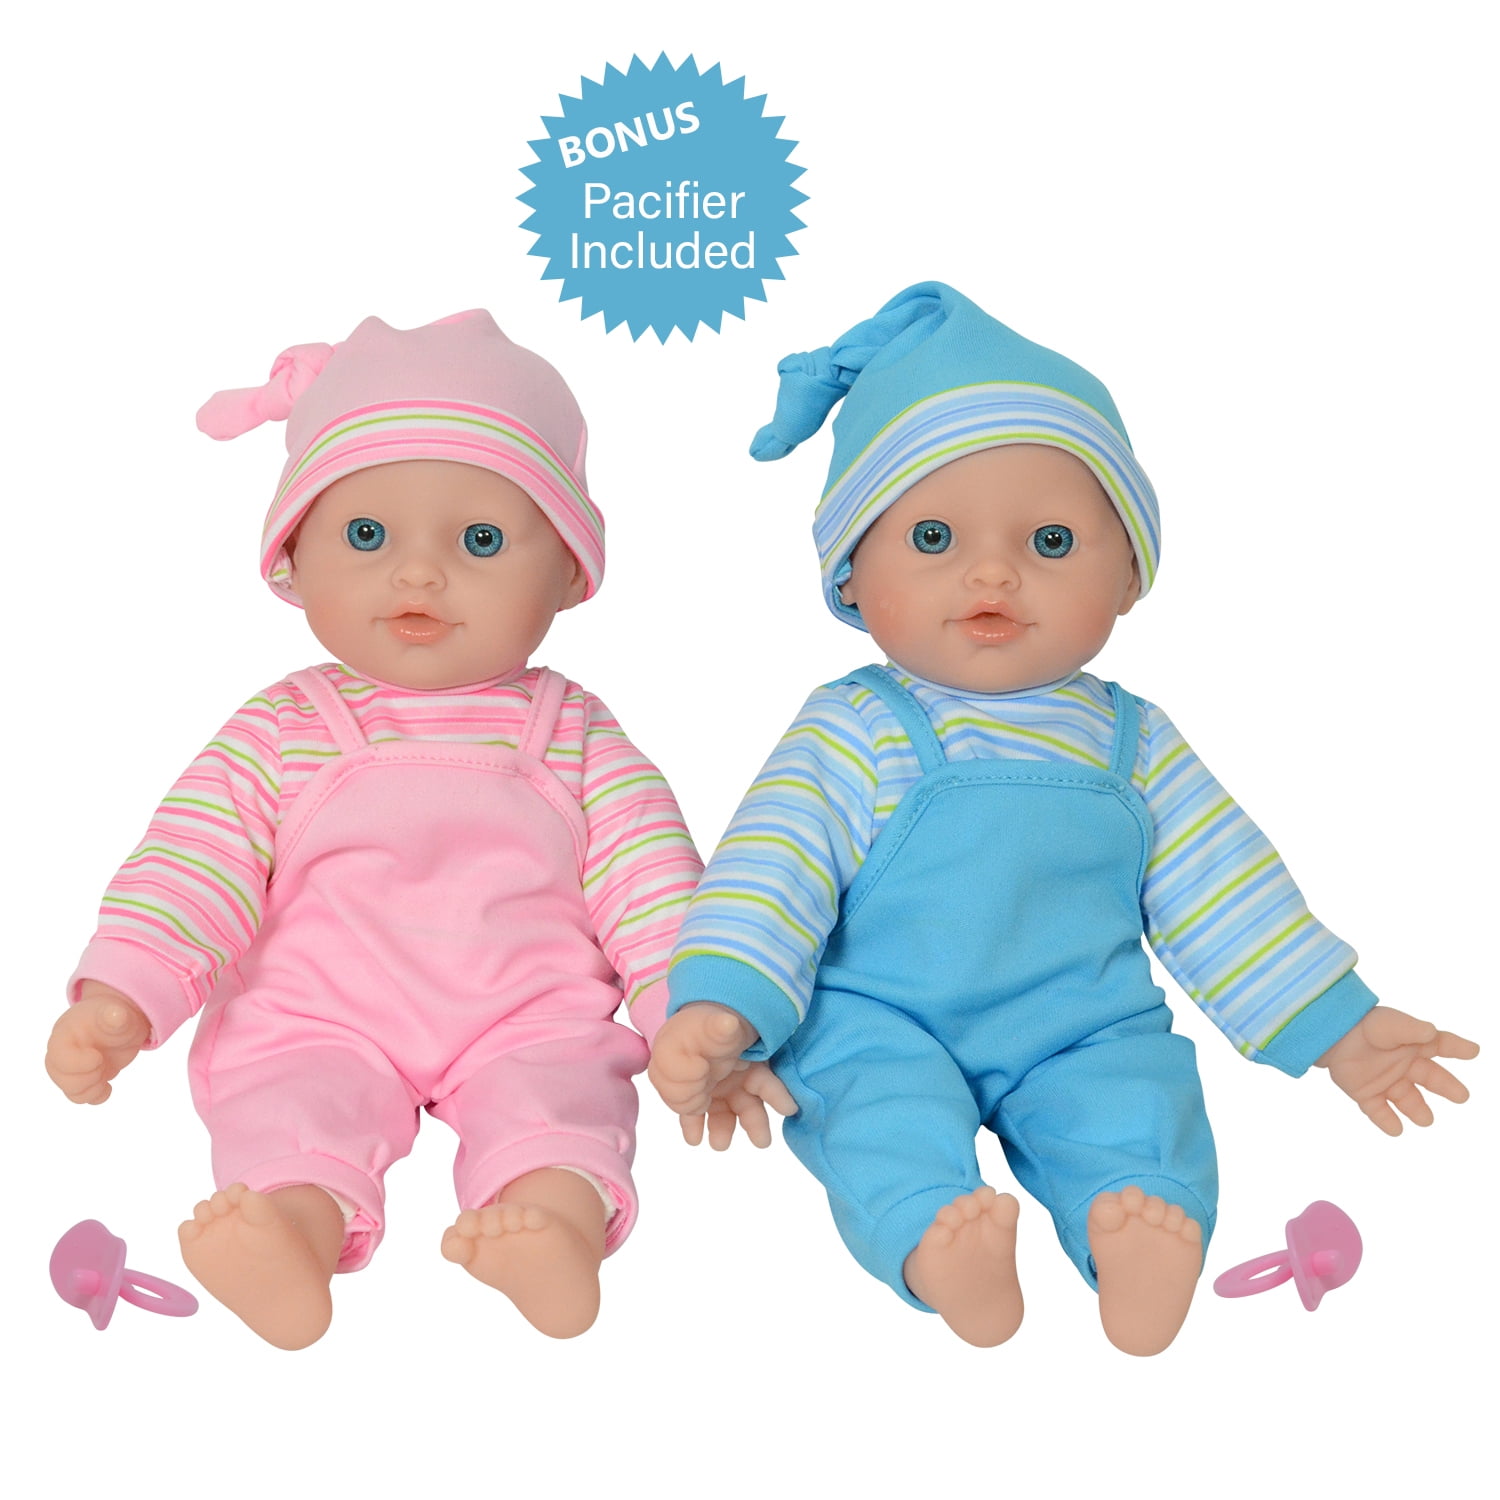 Little Baby Twins Set of 2 Baby Dolls With Dummy Accessory Pink & Purple 